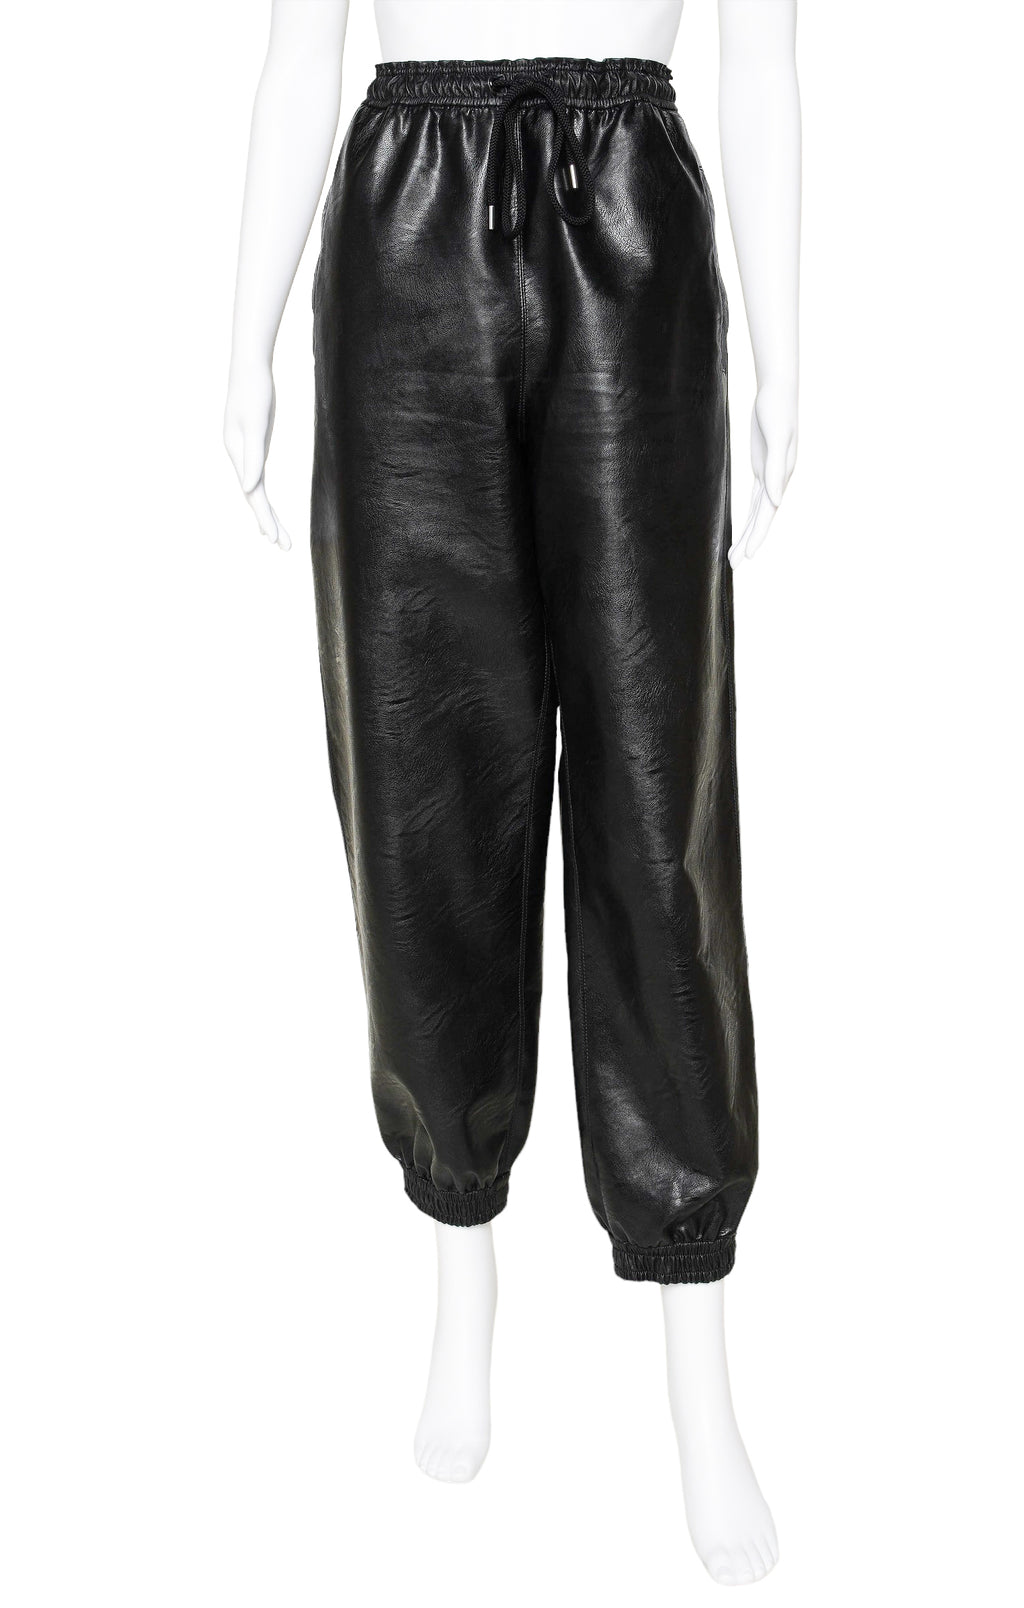 STELLA MCCARTNEY Pants Size: IT 44 / Comparable to US 6-8